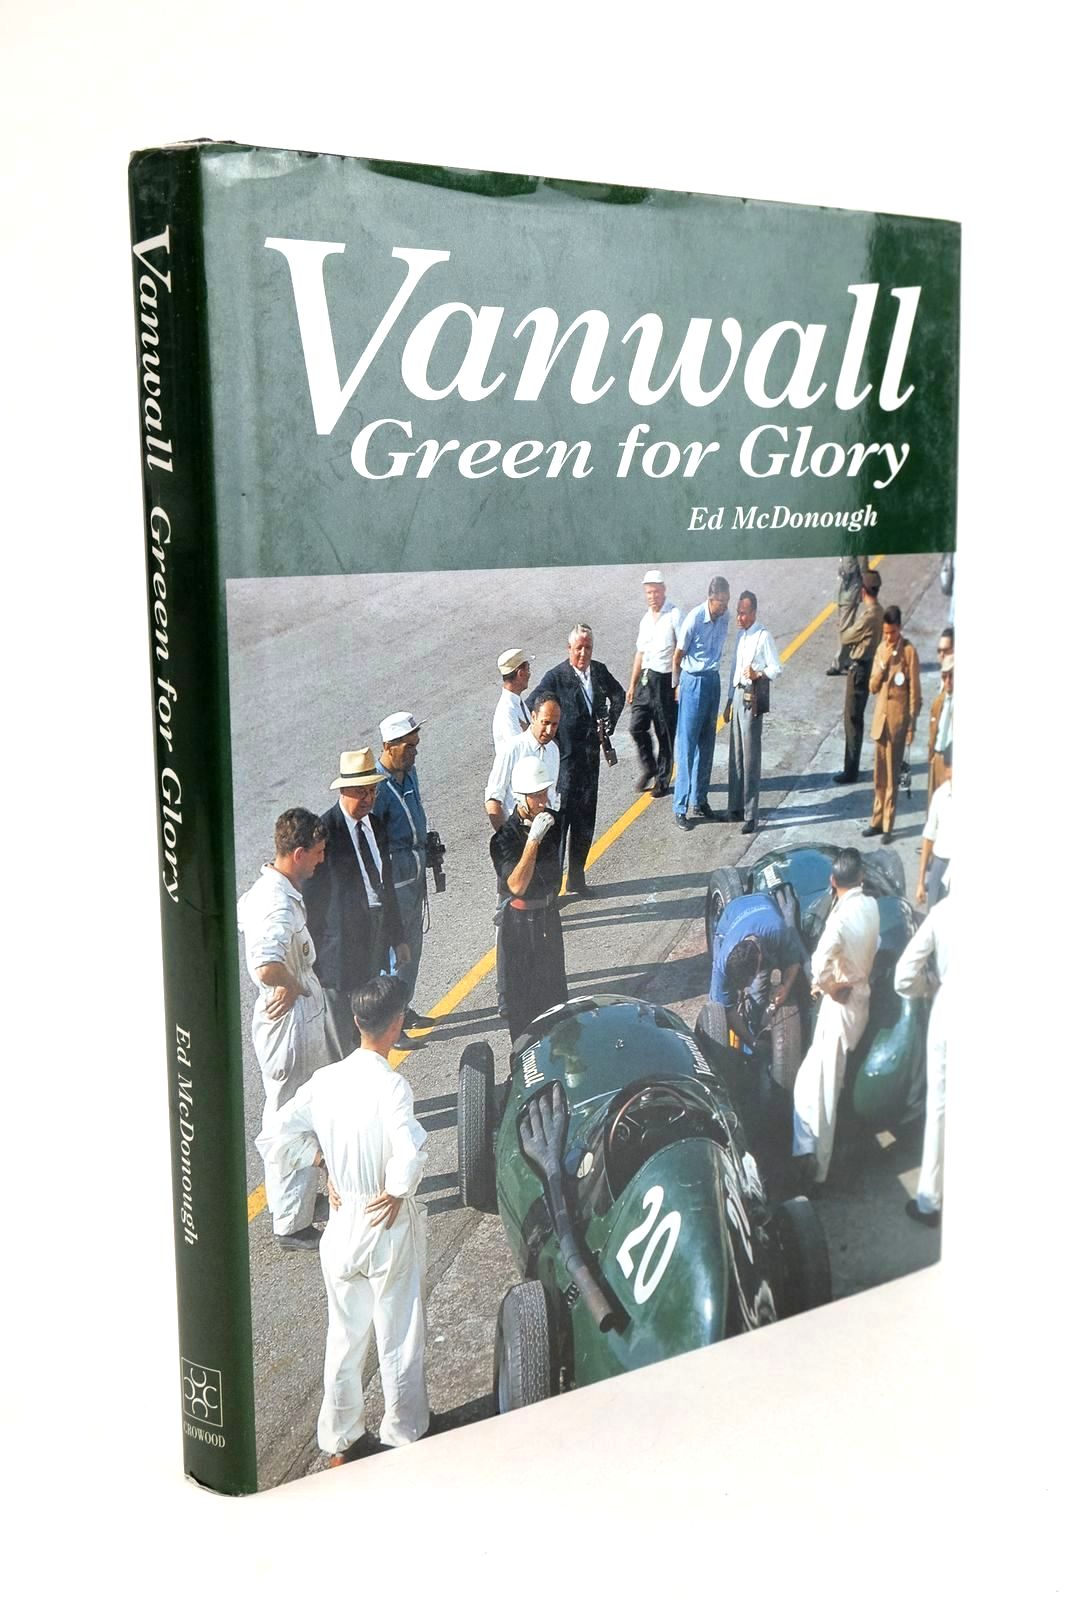 Photo of VANWALL GREEN FOR GLORY written by McDonough, Ed. published by The Crowood Press (STOCK CODE: 1324137)  for sale by Stella & Rose's Books